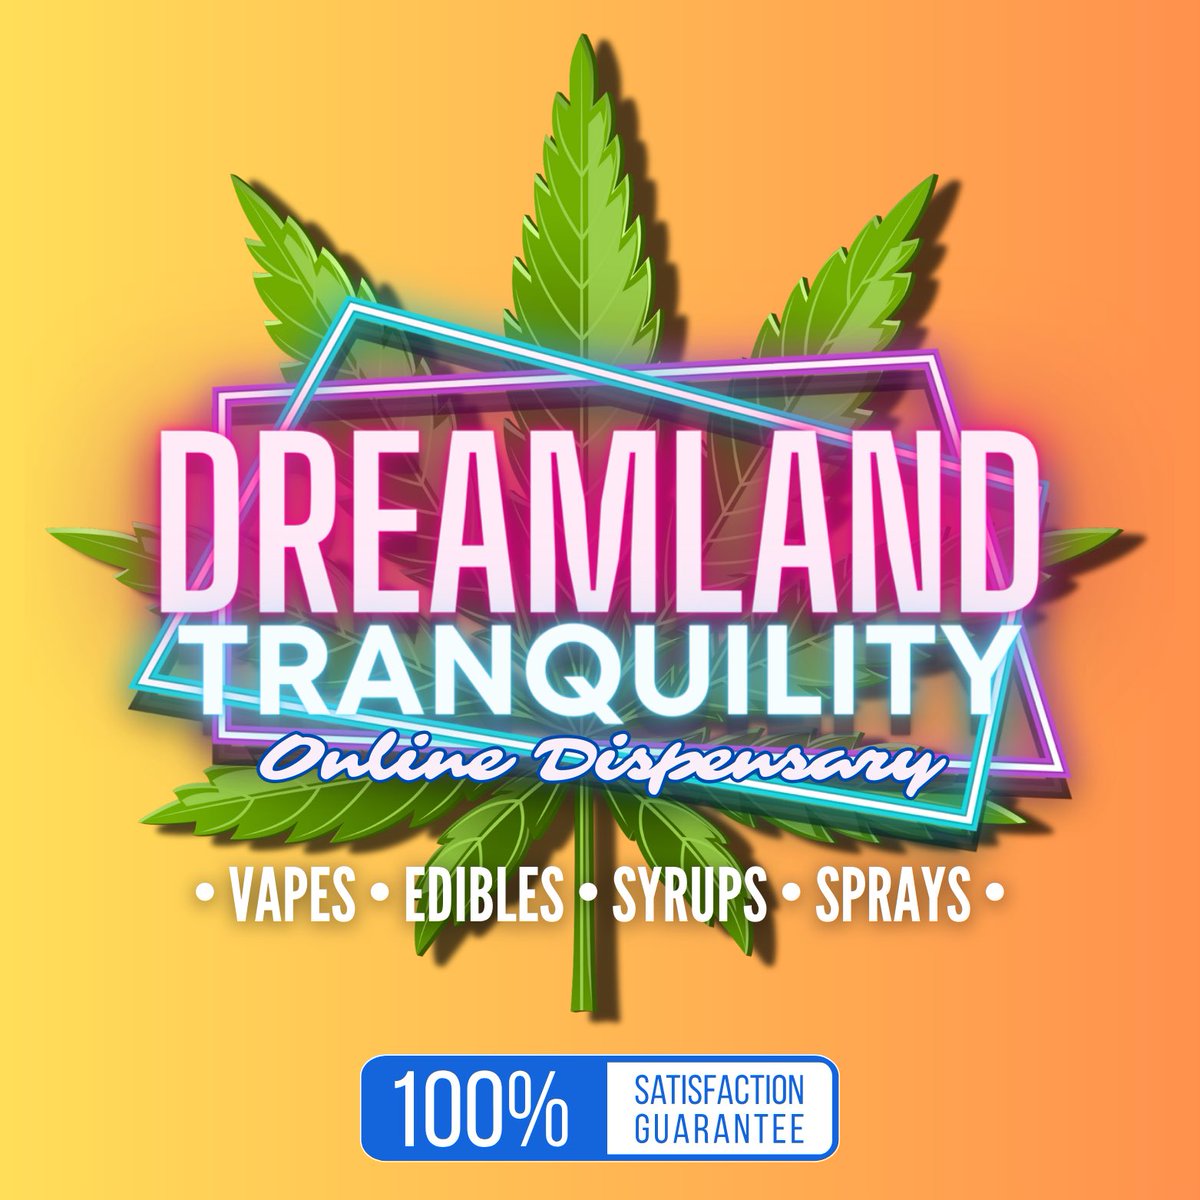 Don’t forget! Anyone that orders today or tomorrow will receive a free random product in their order! Lowest prices, highest quality, GUARANTEED! I ship discreetly to every door in the US. 🫡 Entire site is currently 25% off! Let’s go! Dreamlandtranquility.com 👈🏻